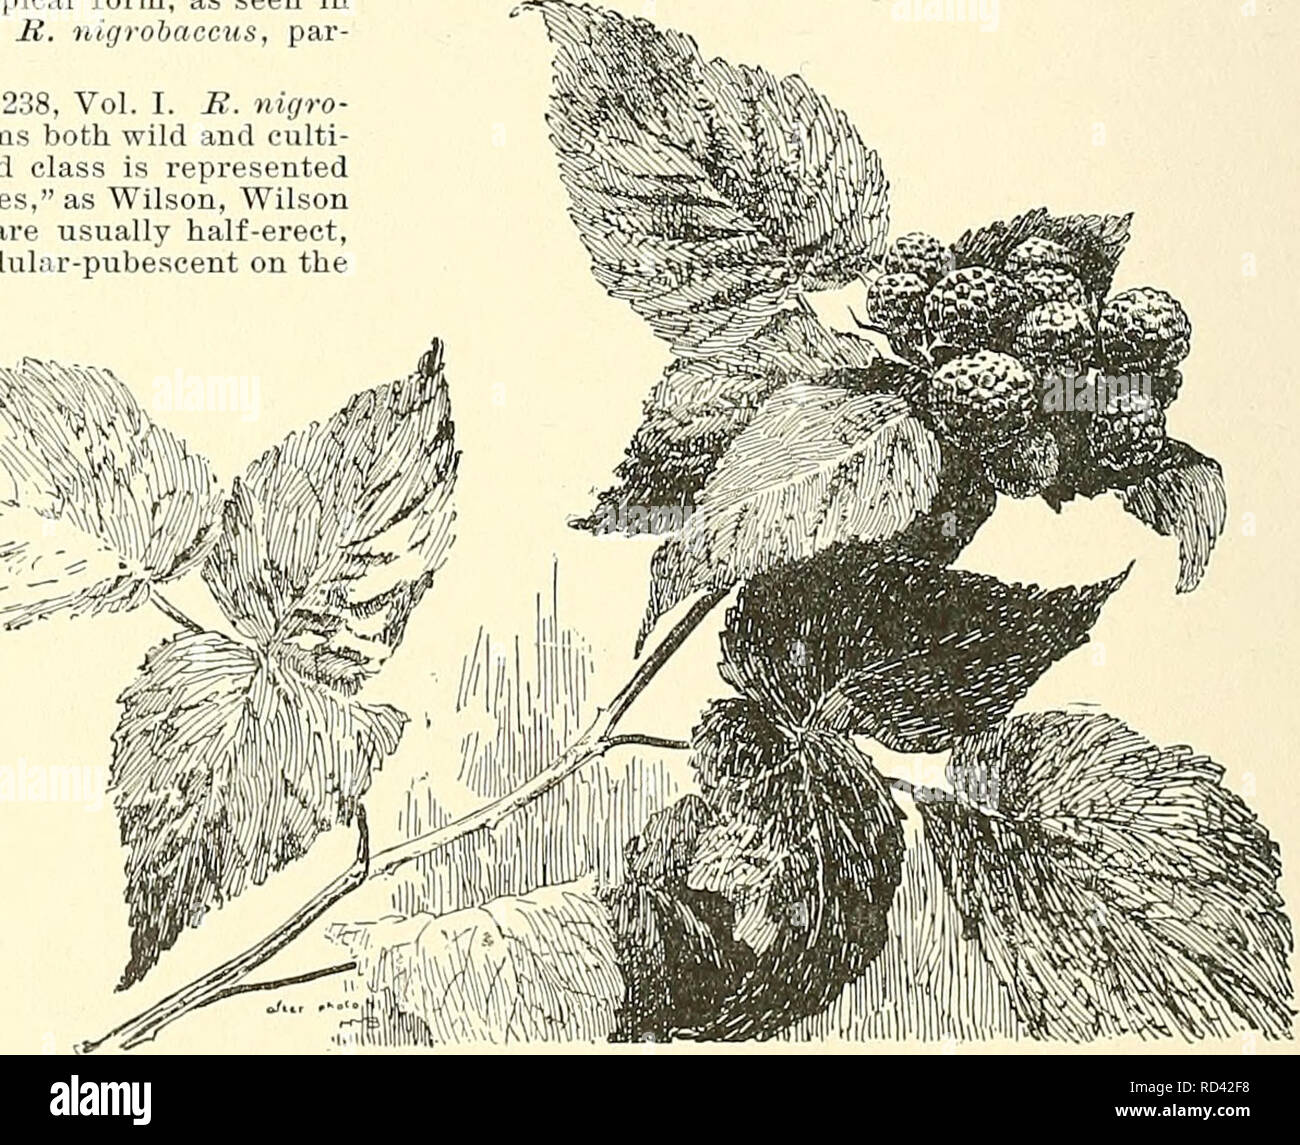 . Cyclopedia of American horticulture, comprising suggestions for cultivation of horticultural plants, descriptions of the species of fruits, vegetables, flowers, and ornamental plants sold in the United States and Canada, together with geographical and biographical sketches. Gardening. 2203. Rubus laciniatus (X M). No. 20. — Distinct in its extreme forms, but running into the species by all manner of intermediate gradations. From this plant the common &quot;Short-cluster Blackberries&quot; of the garden appear to be derived, as Snyder, Kittatinny, Erie, etc. 23. Allegheni6nsis, Porter {B. vlU Stock Photo